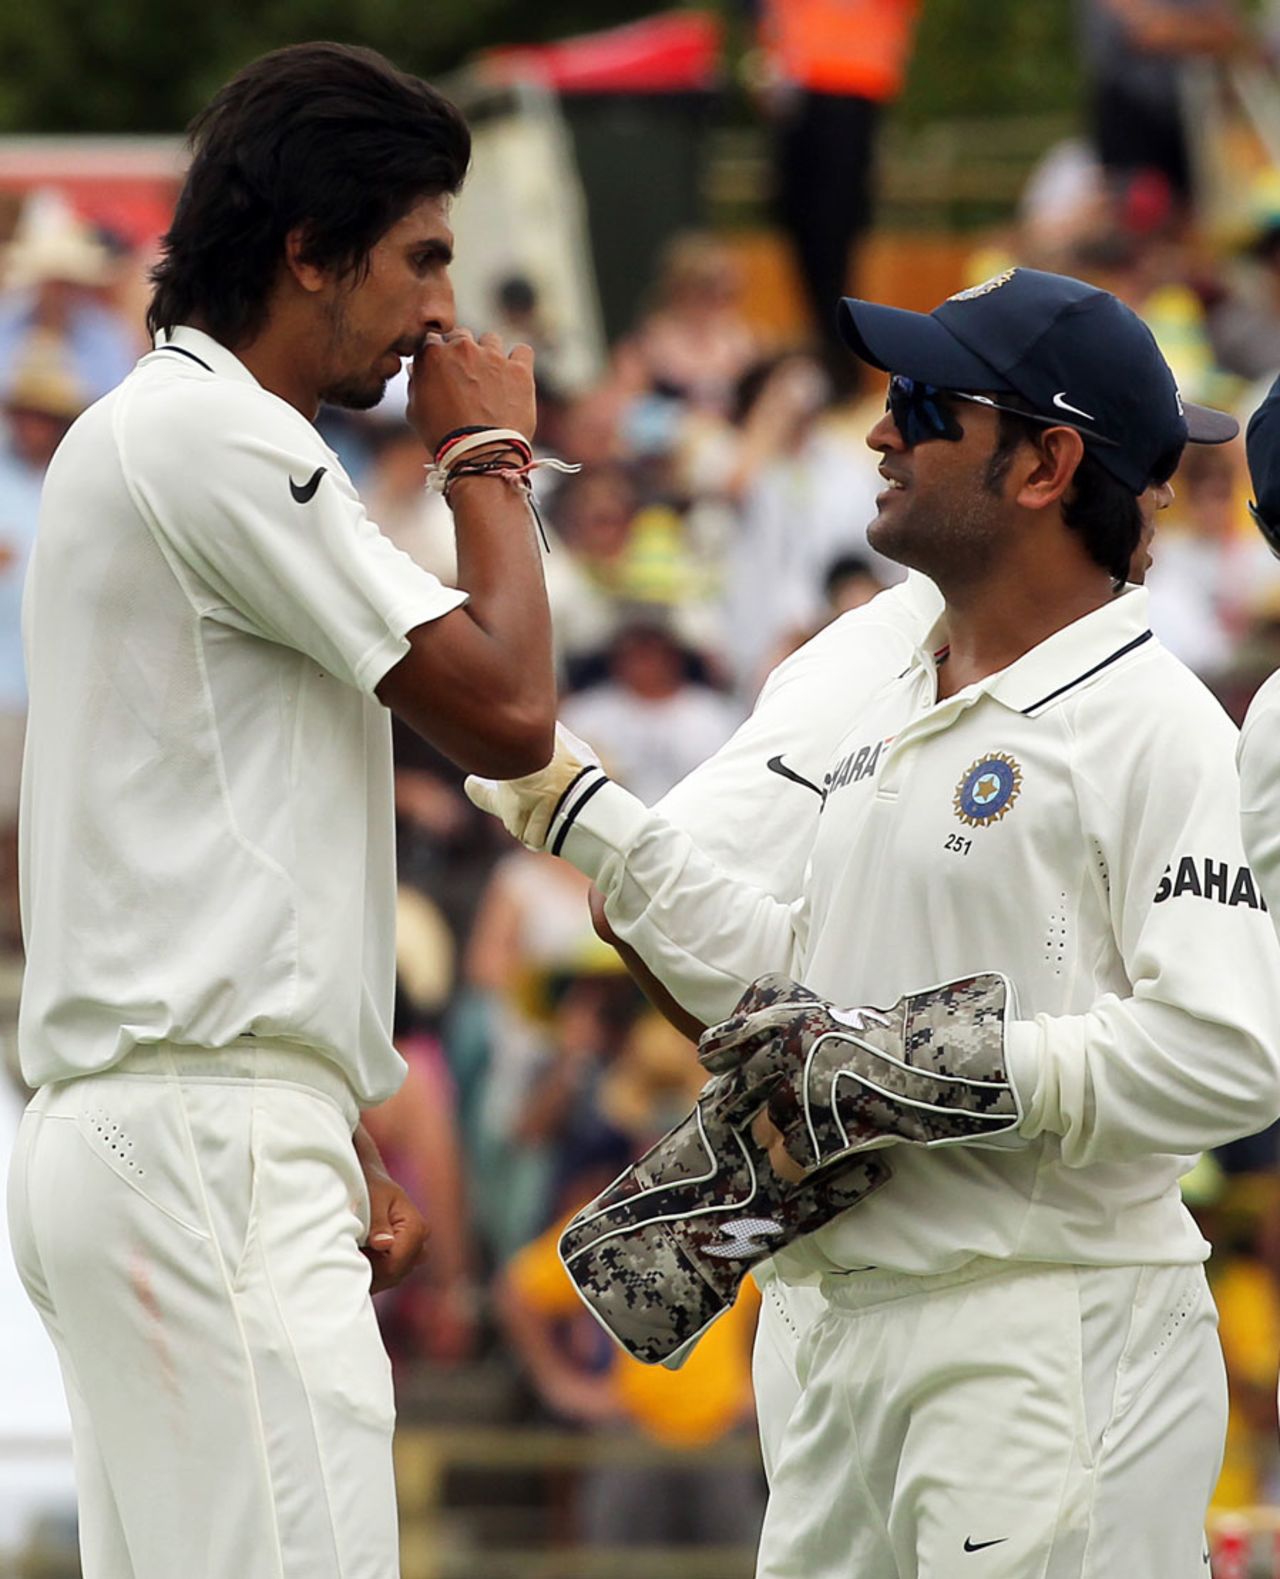 Ishant Sharma chats with MS Dhoni after taking a wicket, Australia v India, 3rd Test, Perth, 2nd day, January 14, 2012